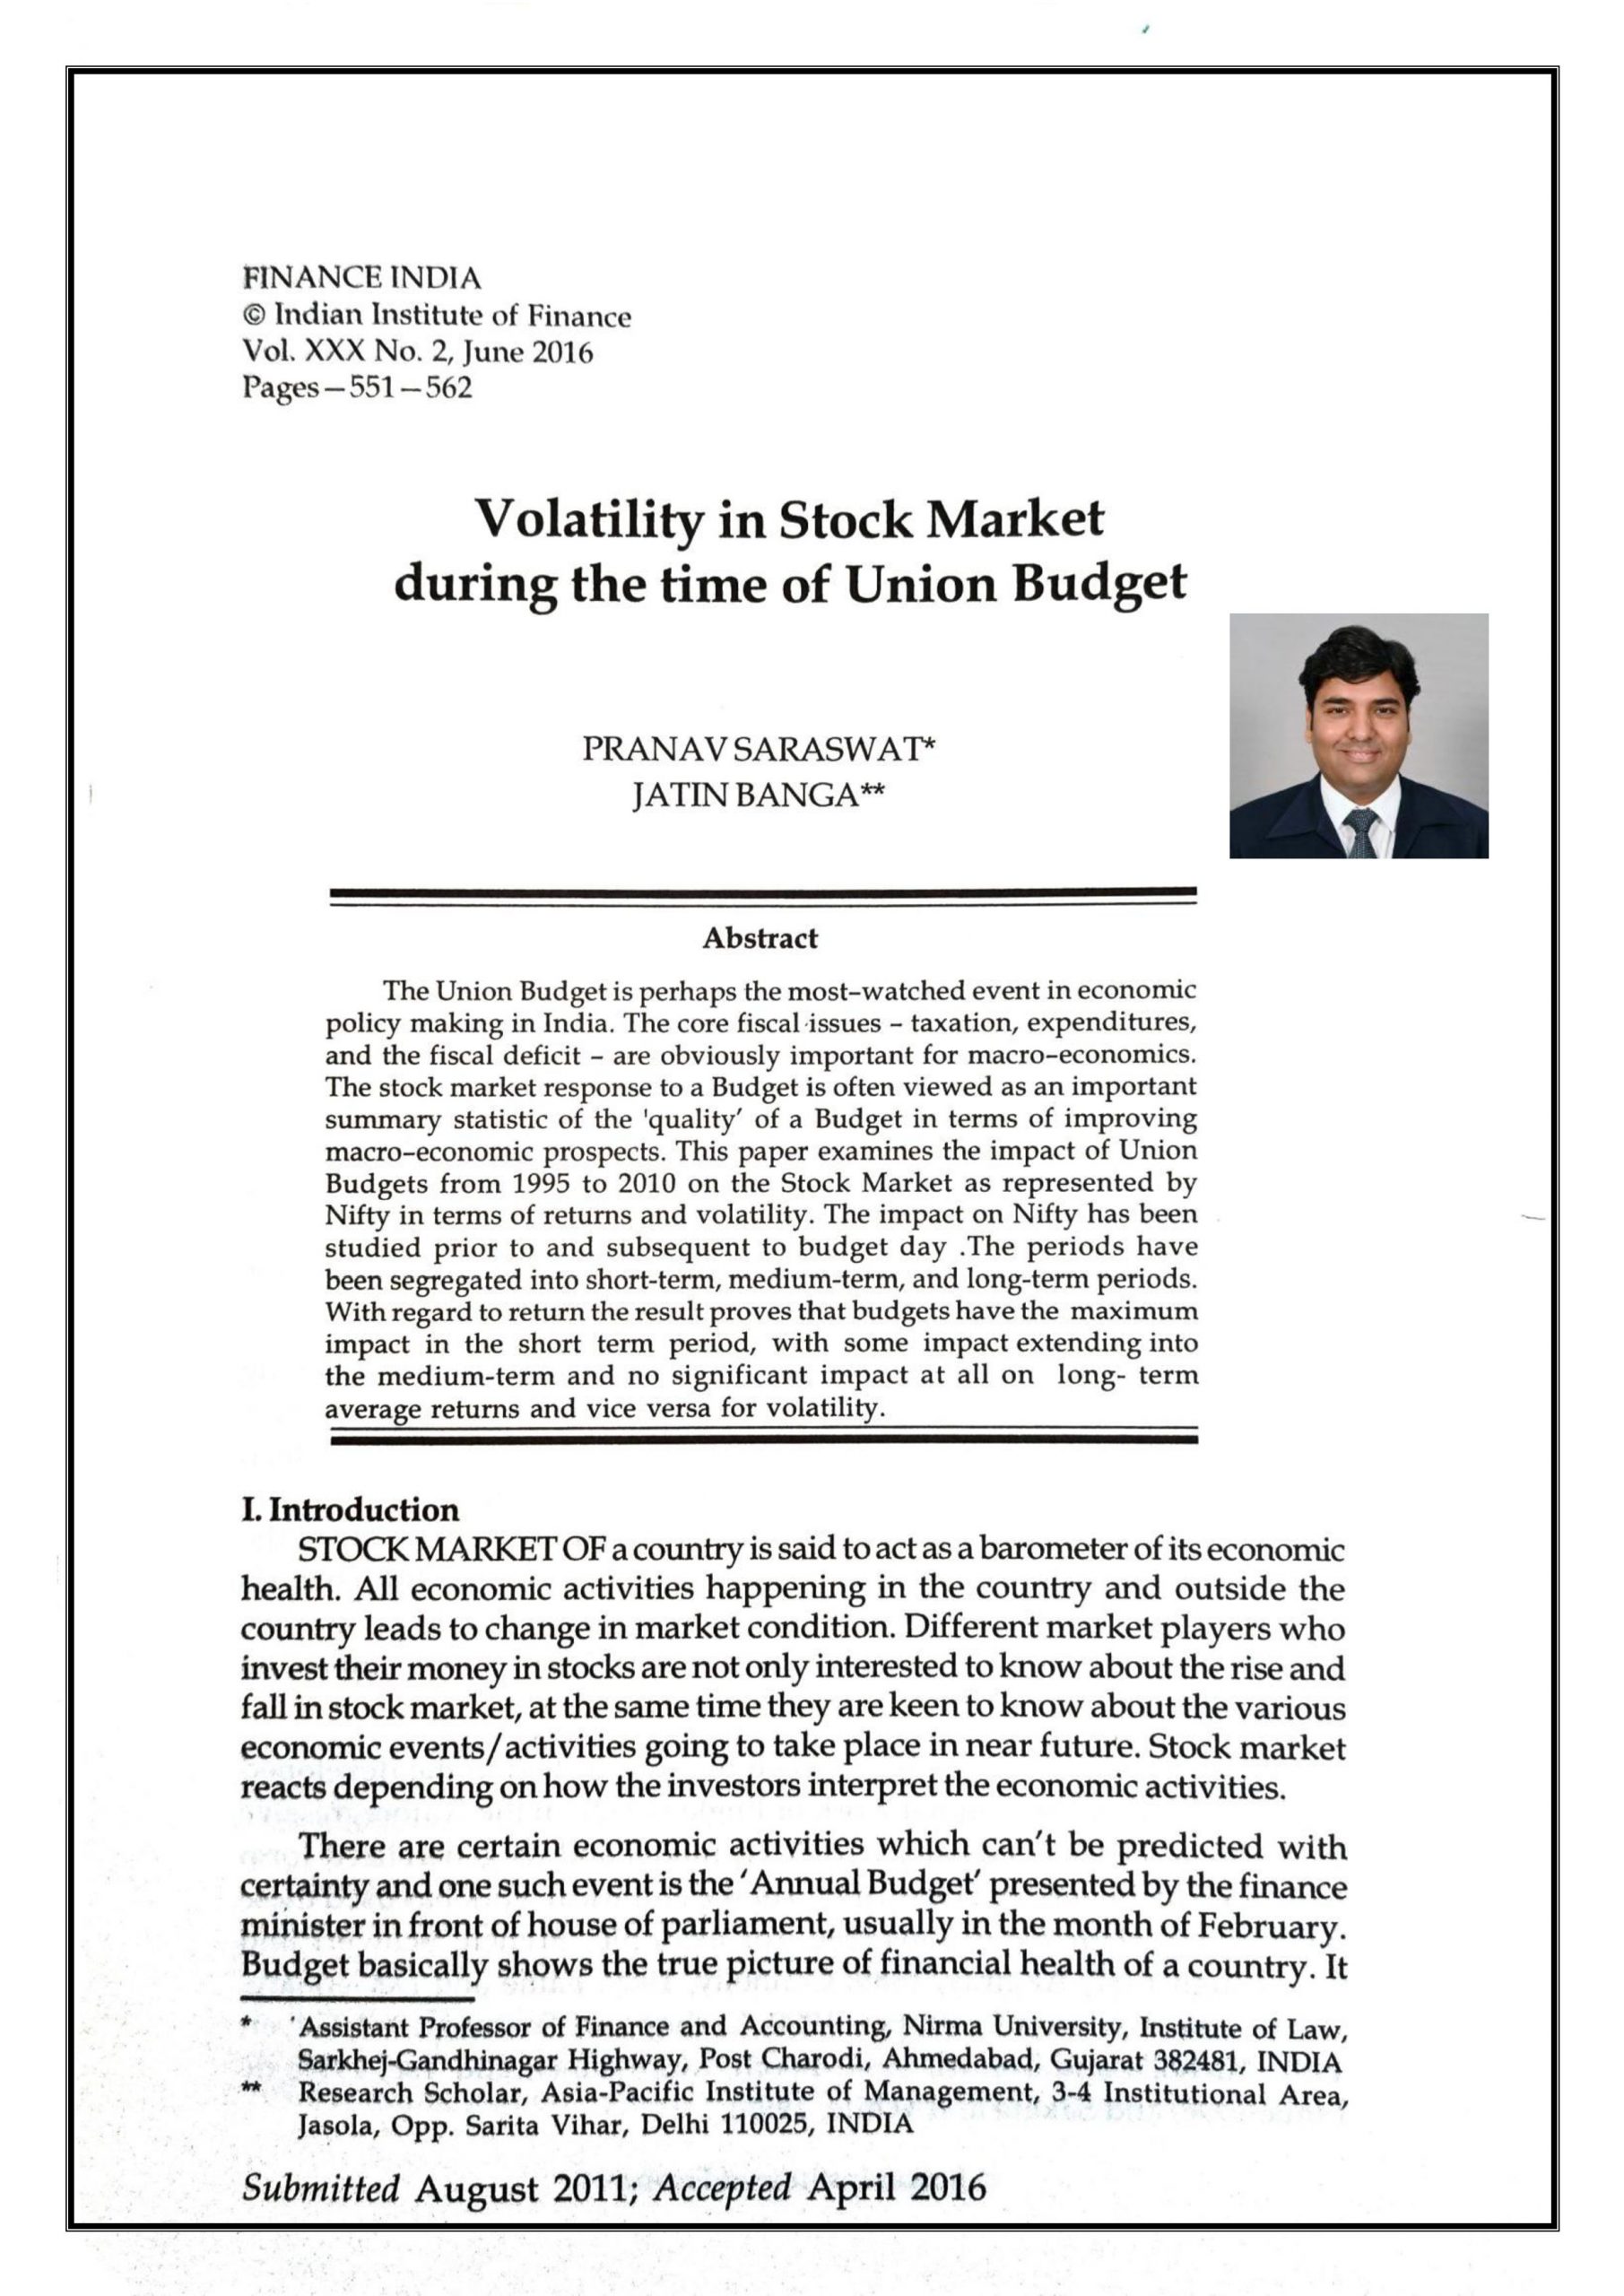 Volatility of stock market during the time of Indian Union Budget: An empirical evidence